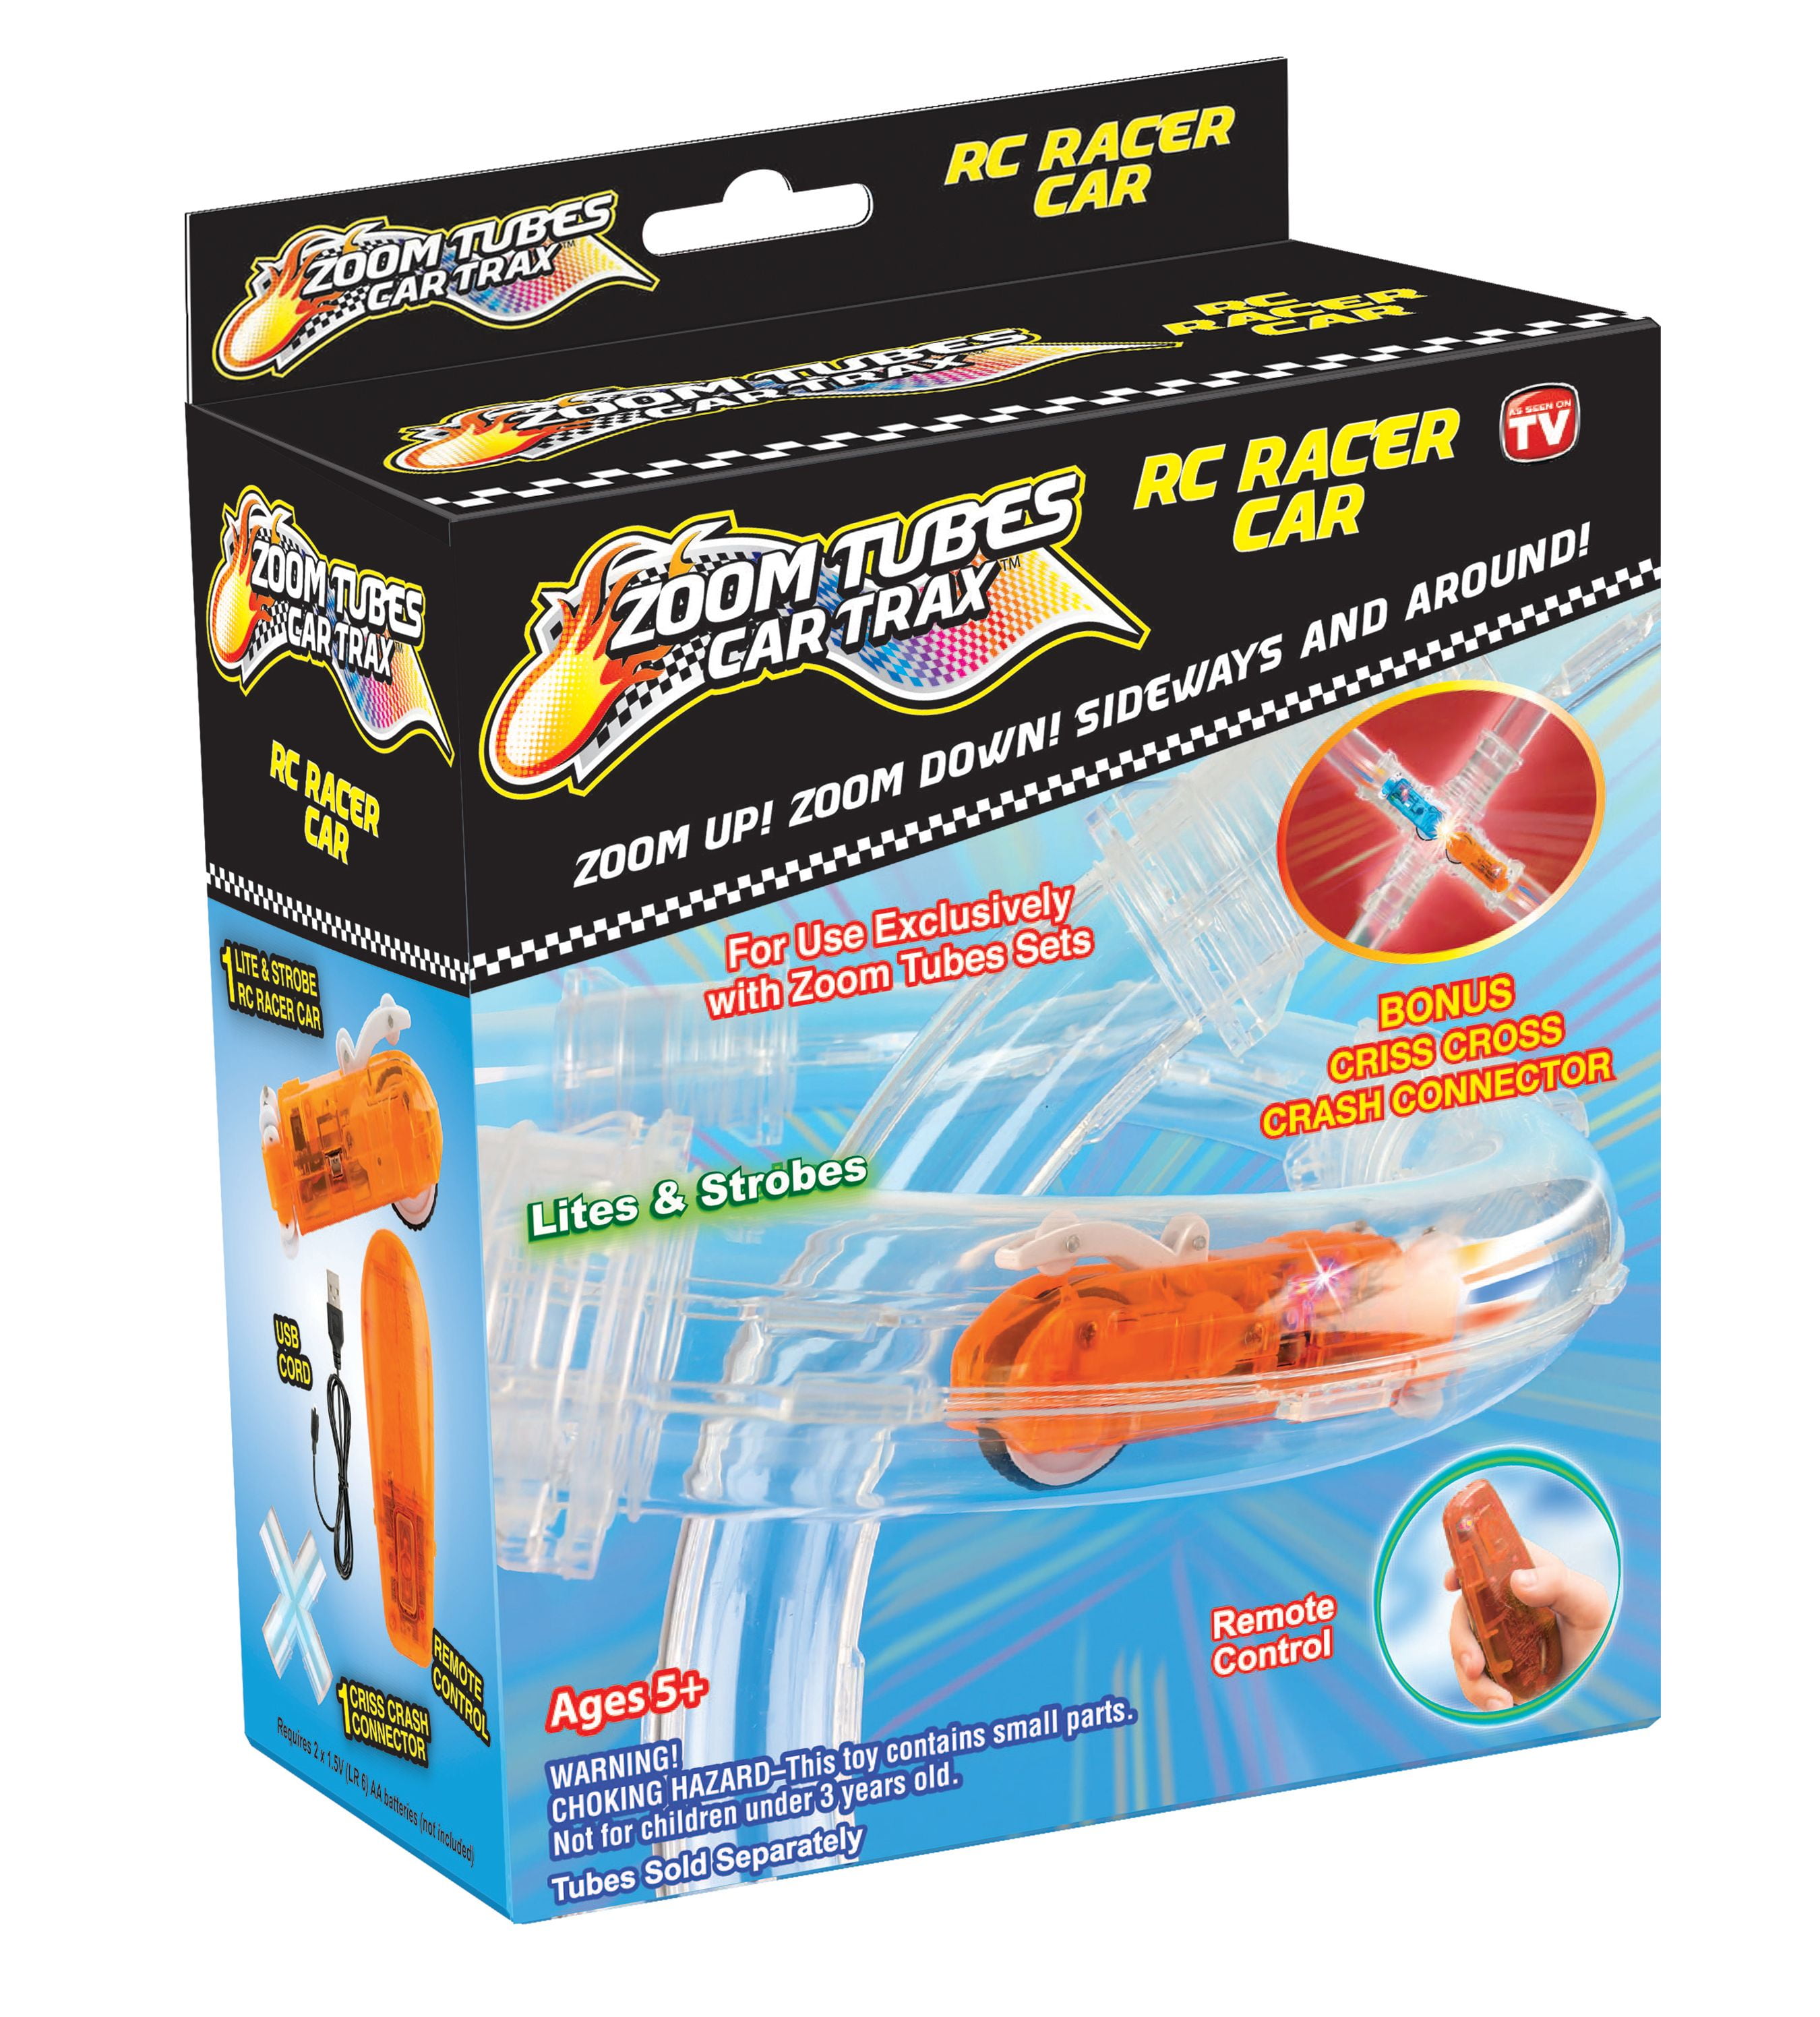 ZOOM TUBES CAR TRAX 25-Pc RC Car Trax Set with 1 Blue Racer & Over 12ft of Tubes 